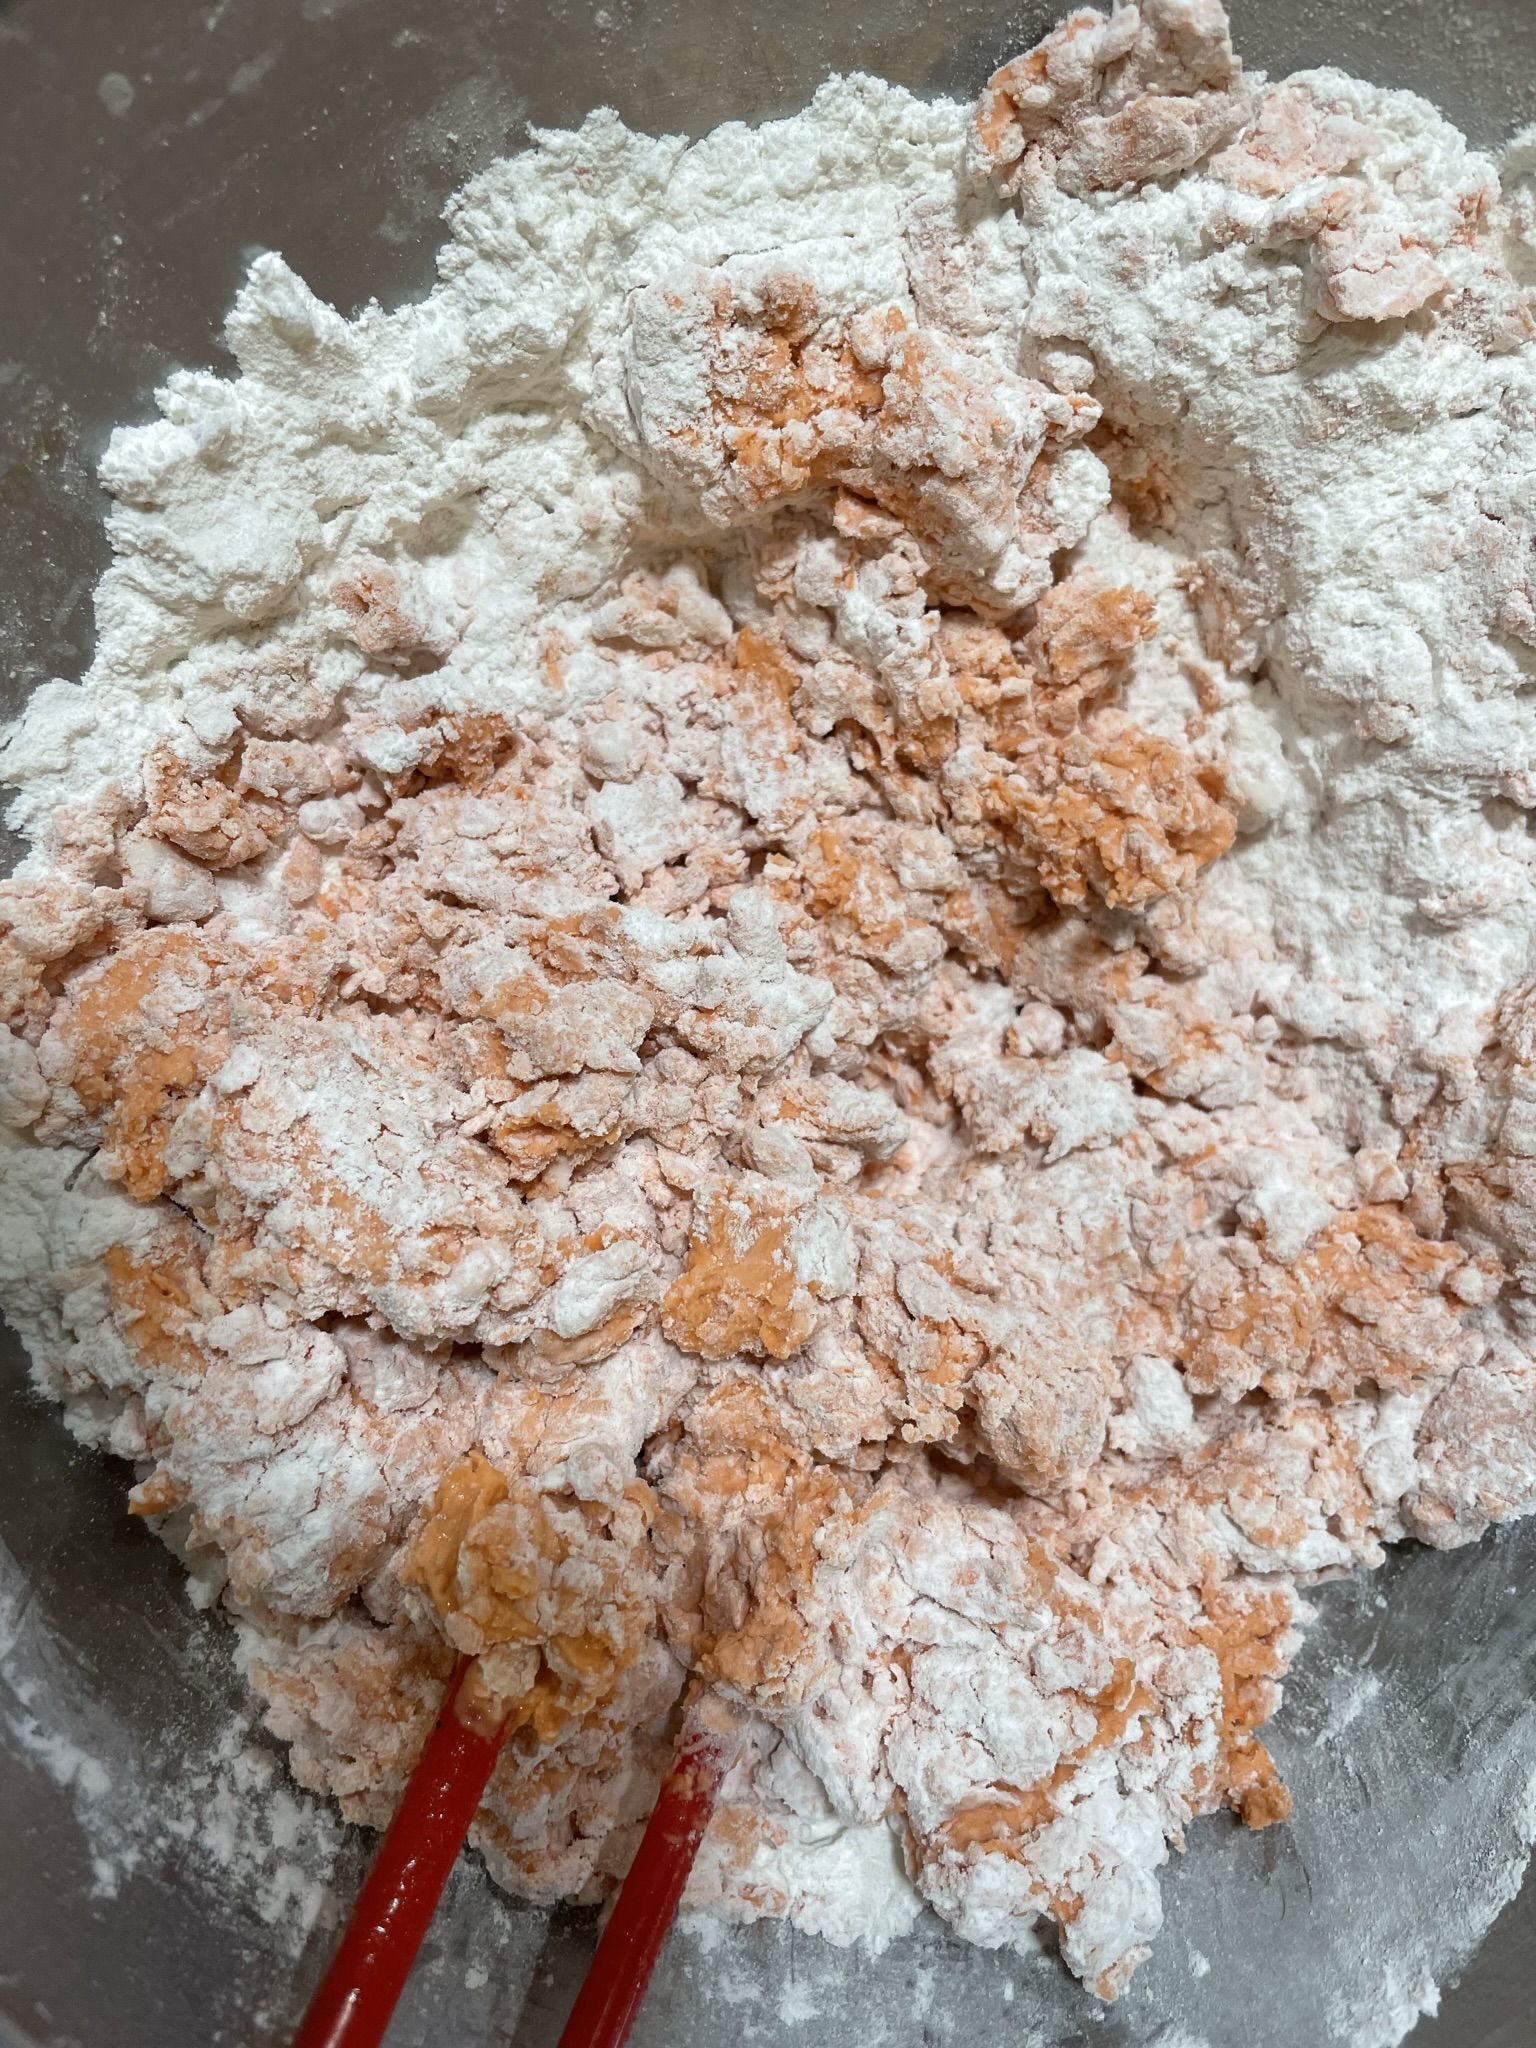 Dry and crumbly dough prior to hand kneading.